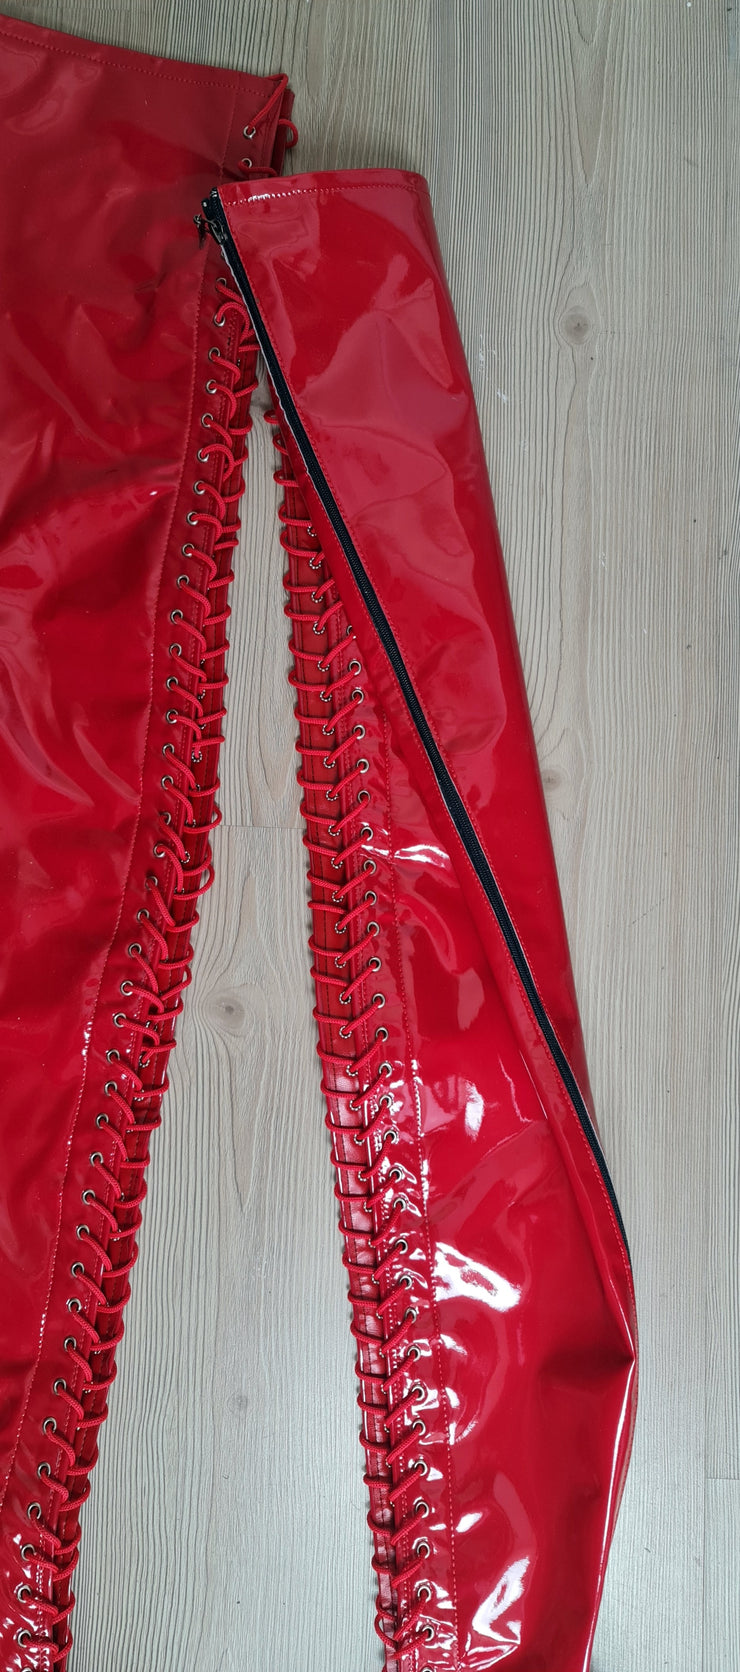 100-cm-thigh-high-red-latex-gloss-clour-high-heel-lace-up-gladiator-fetish-boots